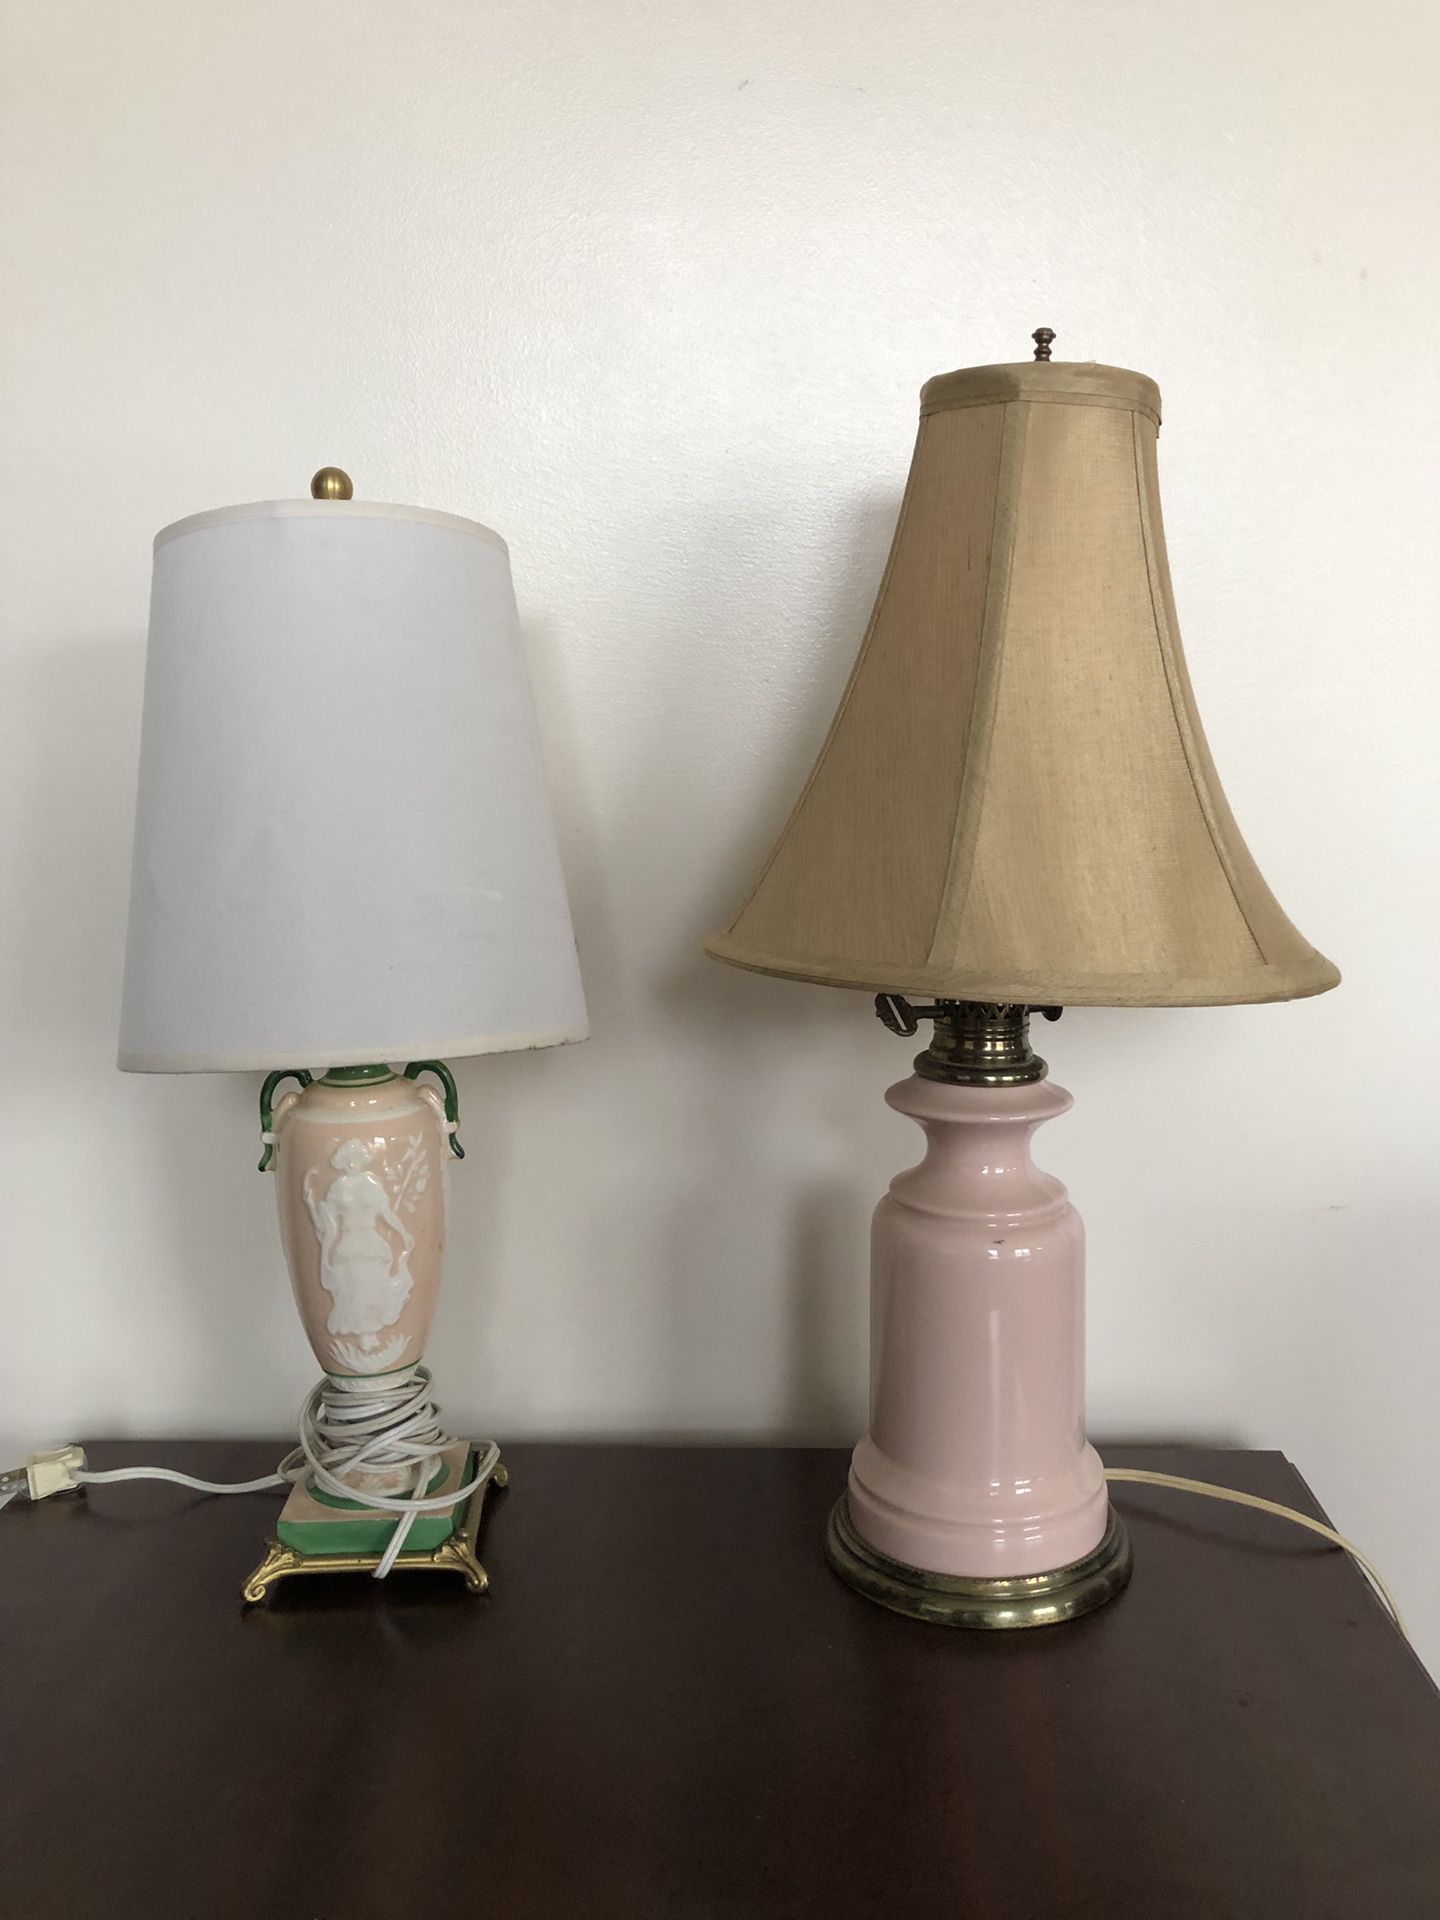 Vintage Lamps Pink & Shade Shabby Romantic Chic Decor Lamp WORK GREAT!